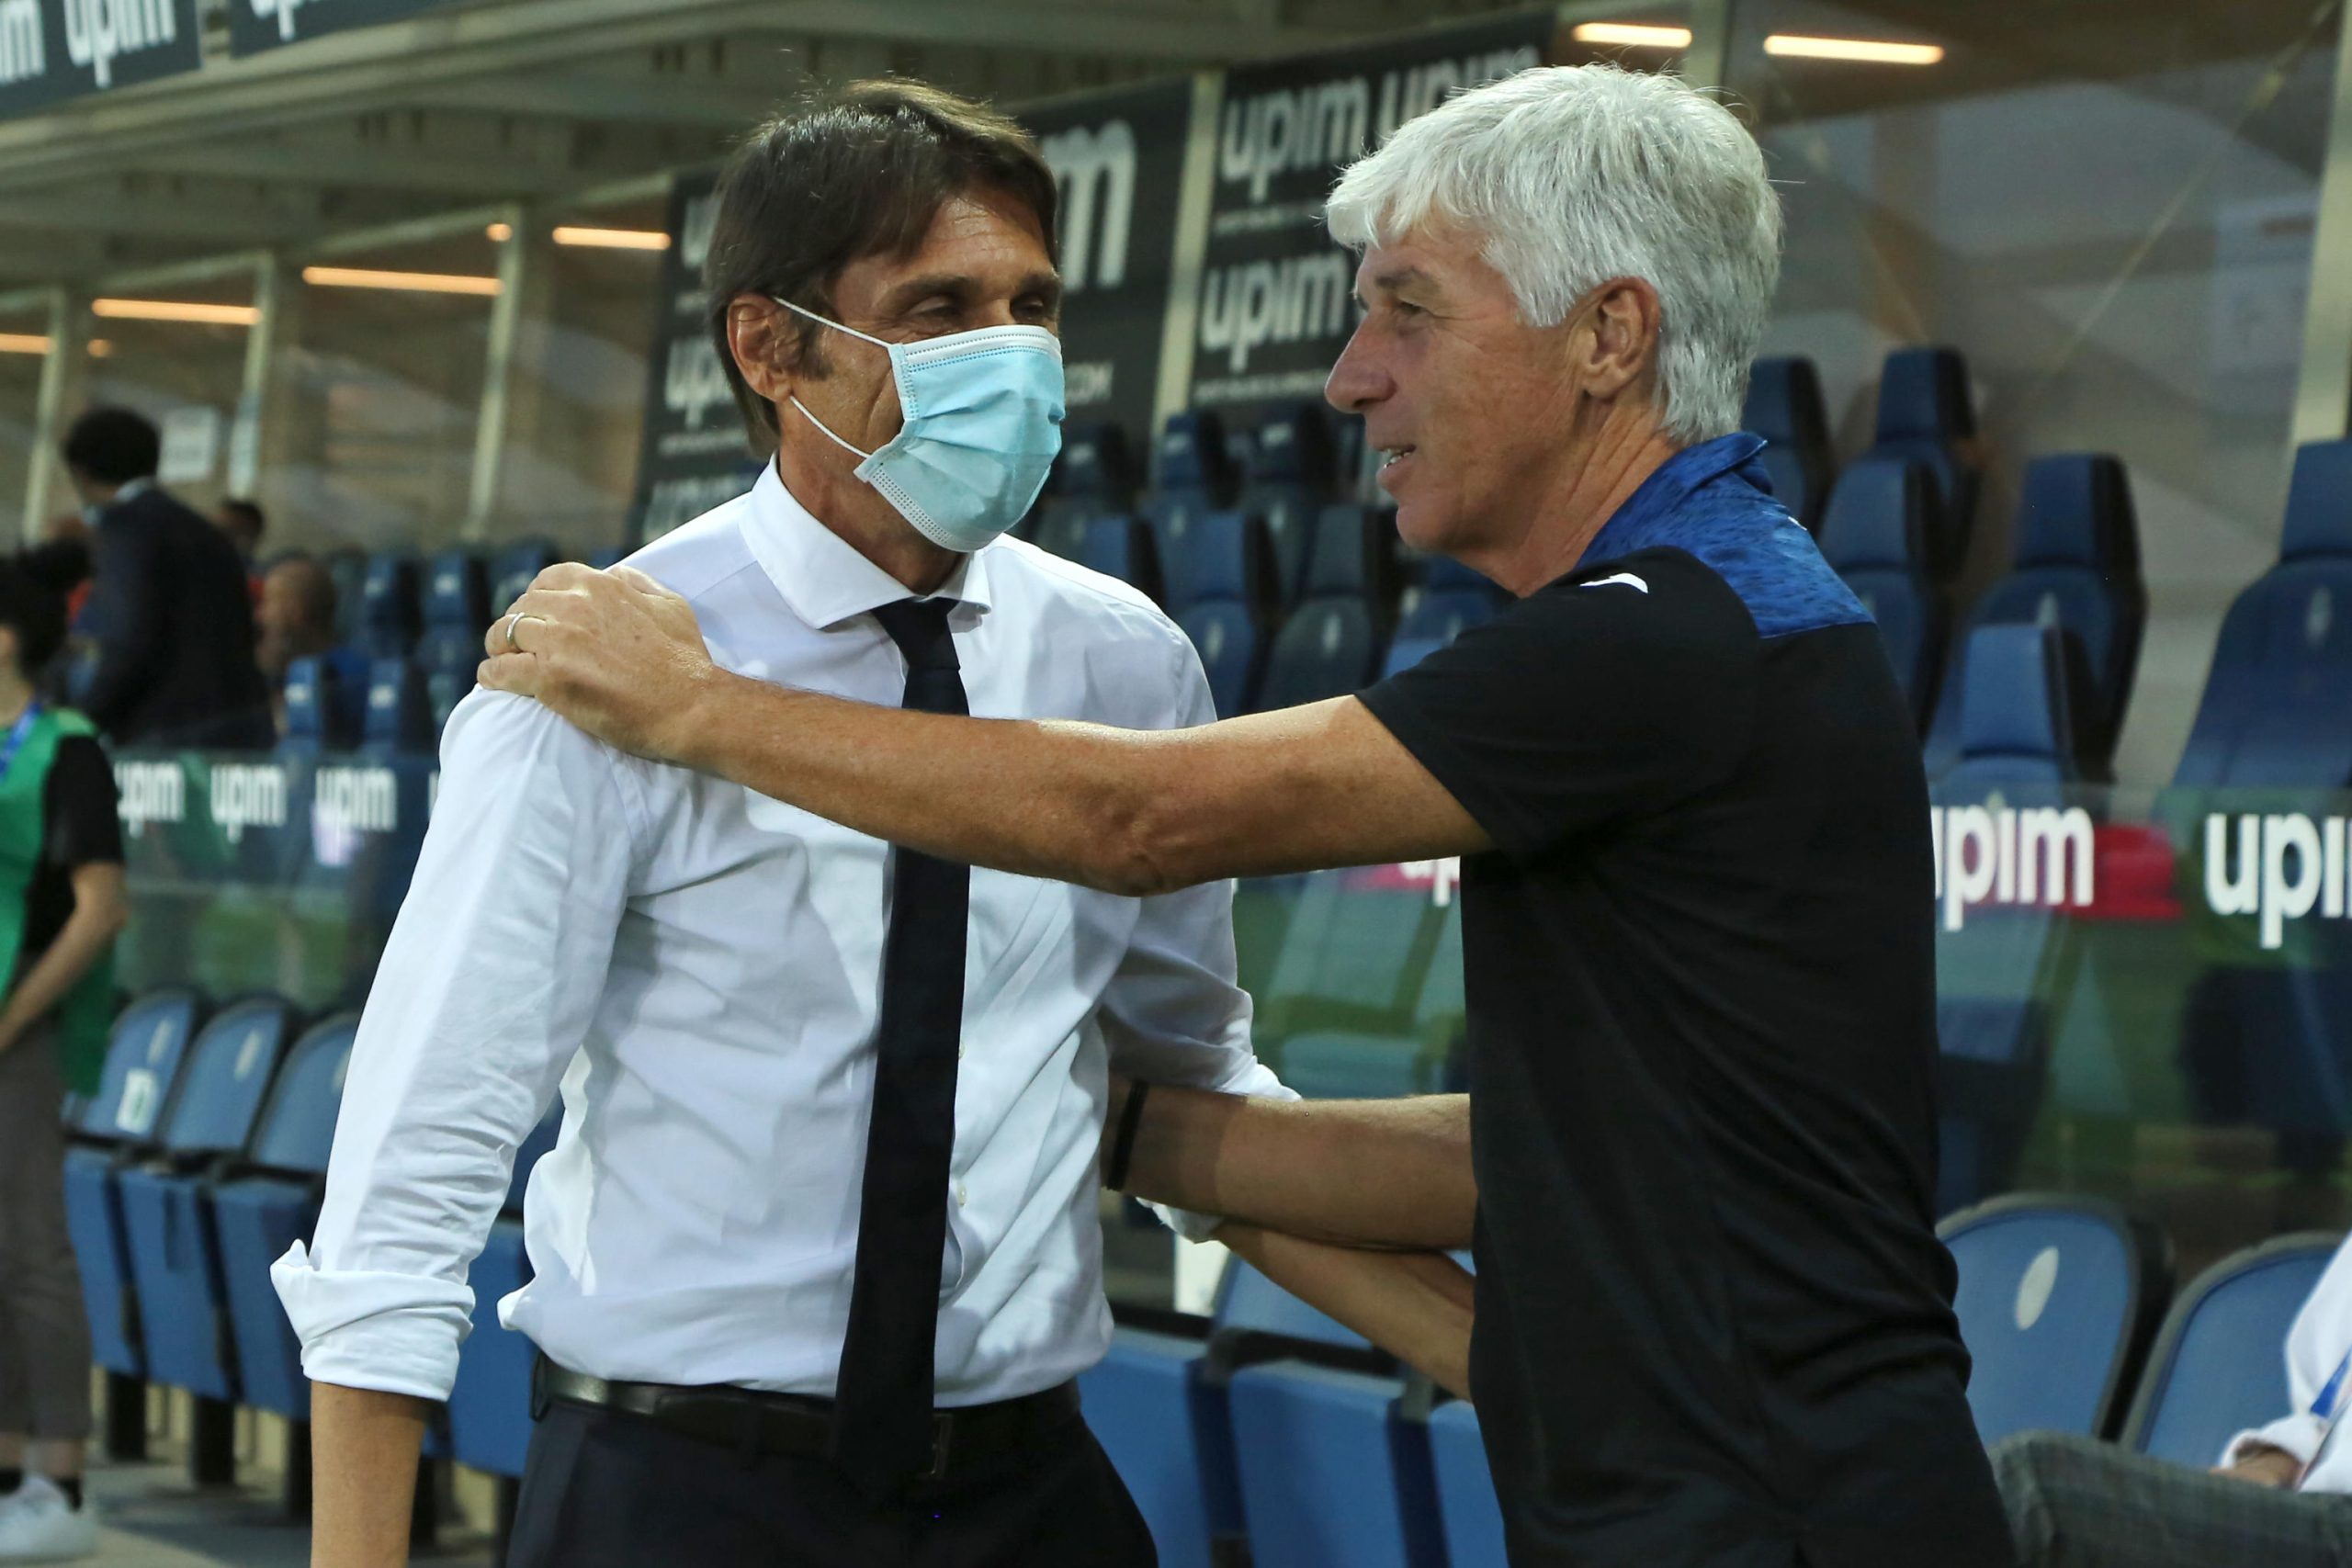 Conte or Gasperini: who is Juventus' ideal replacement for Allegri? -  Football Italia